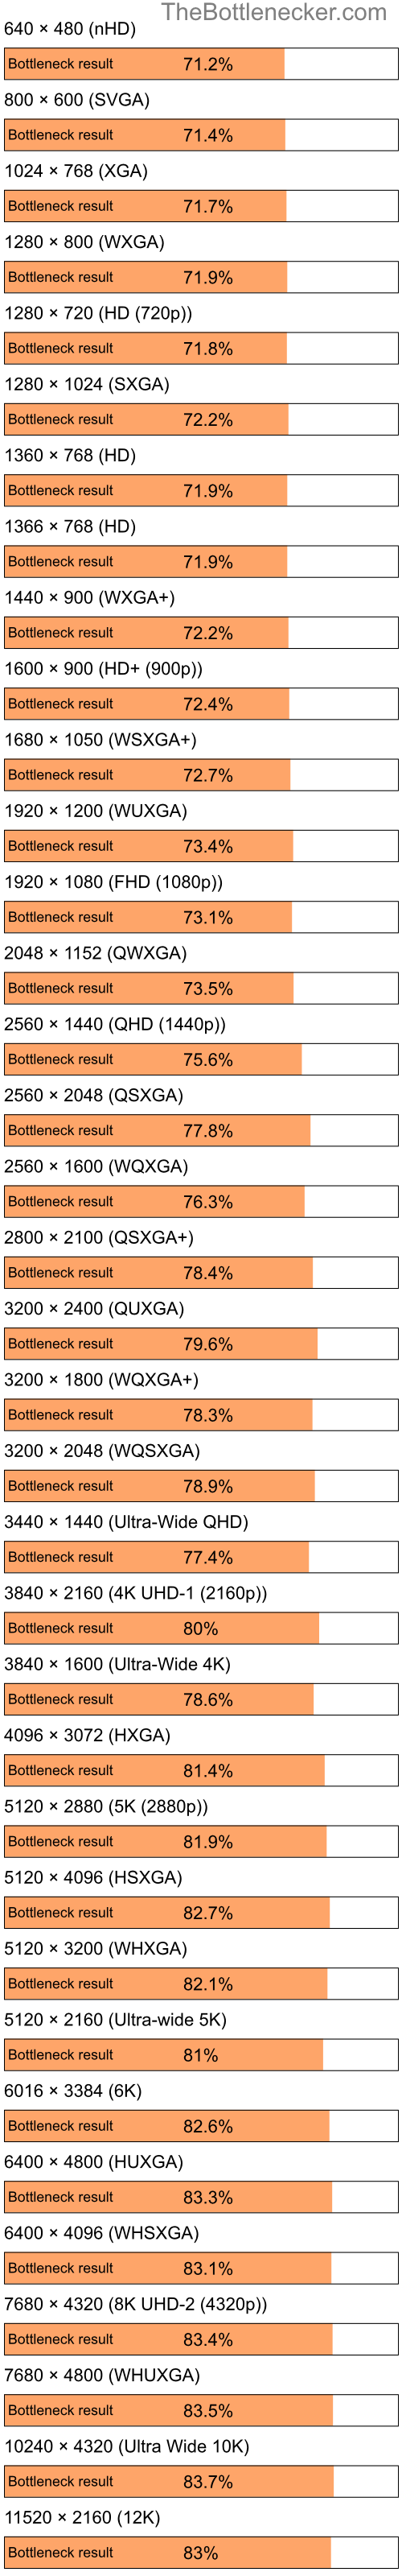 Bottleneck results by resolution for Intel Celeron and AMD Radeon X700 PRO in Graphic Card Intense Tasks